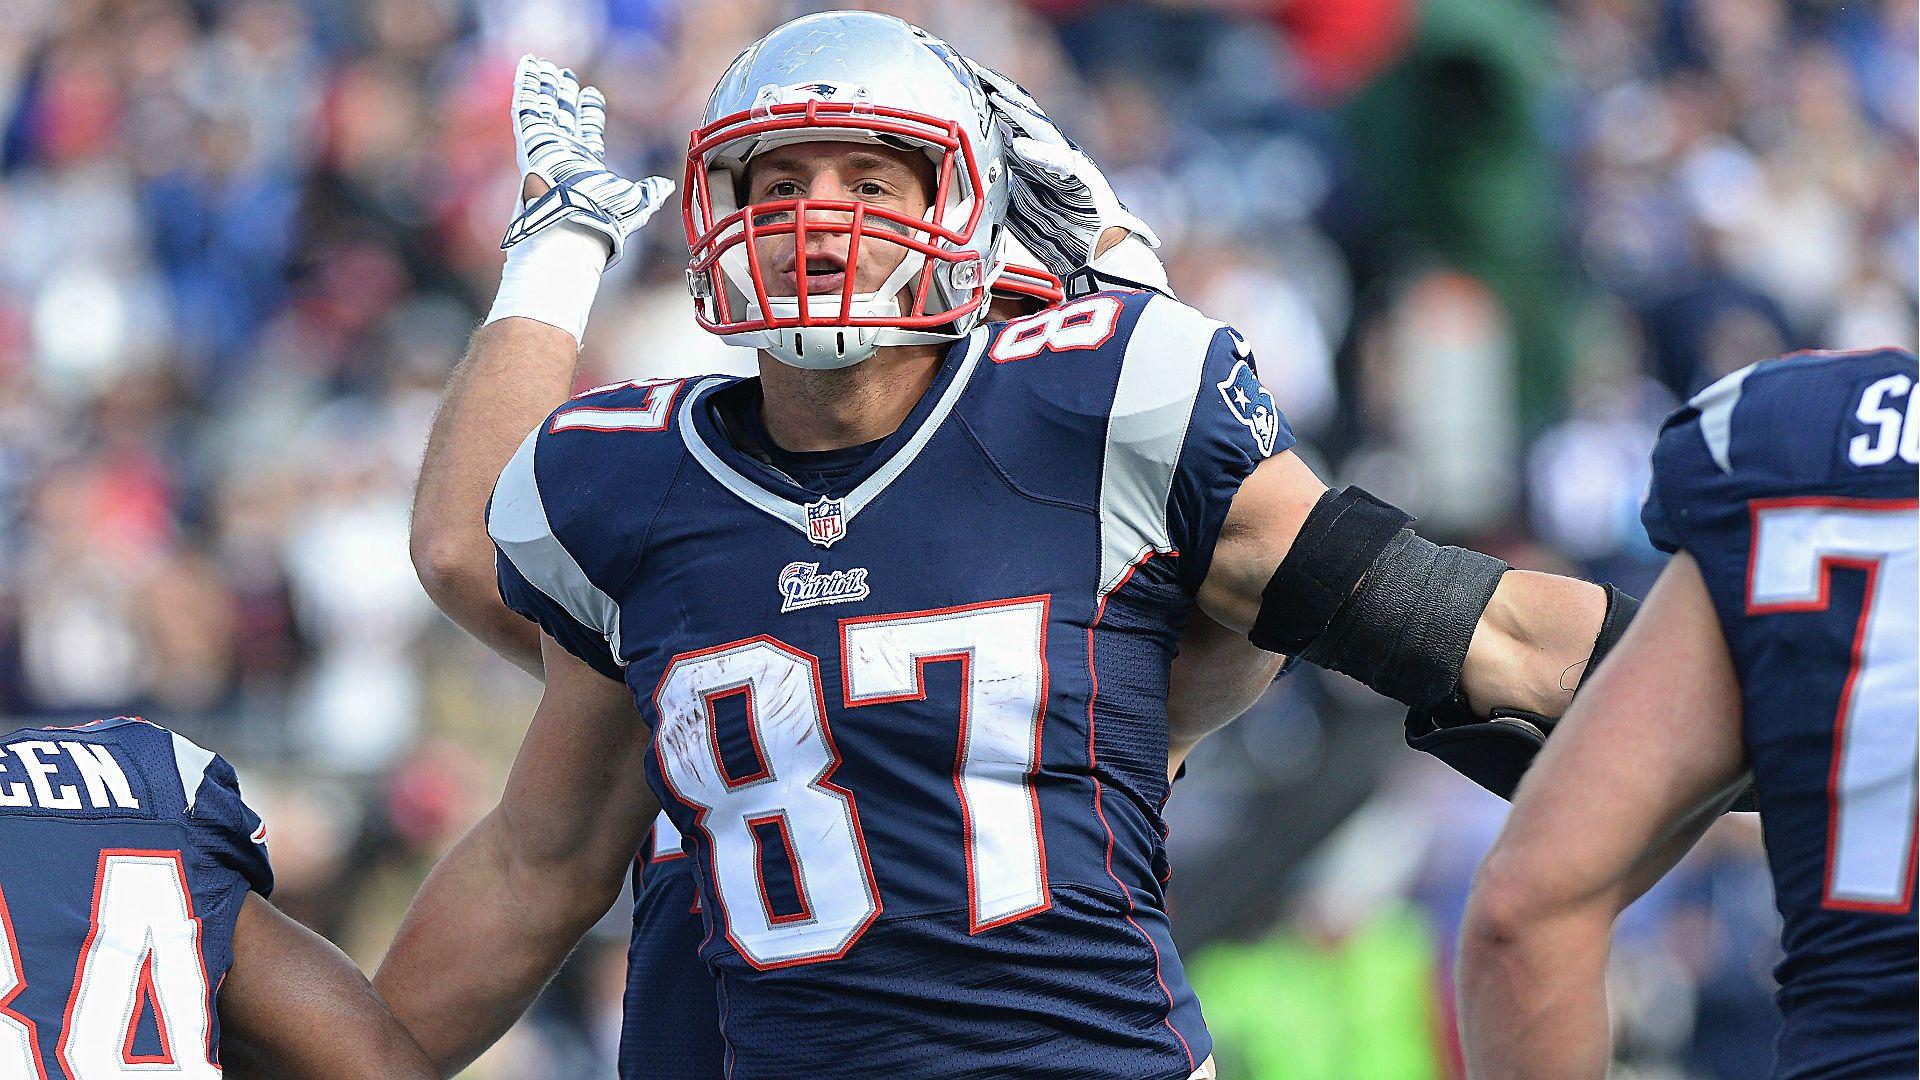 Rob Gronkowski 2018 Wallpapers Wallpaper Cave Images, Photos, Reviews